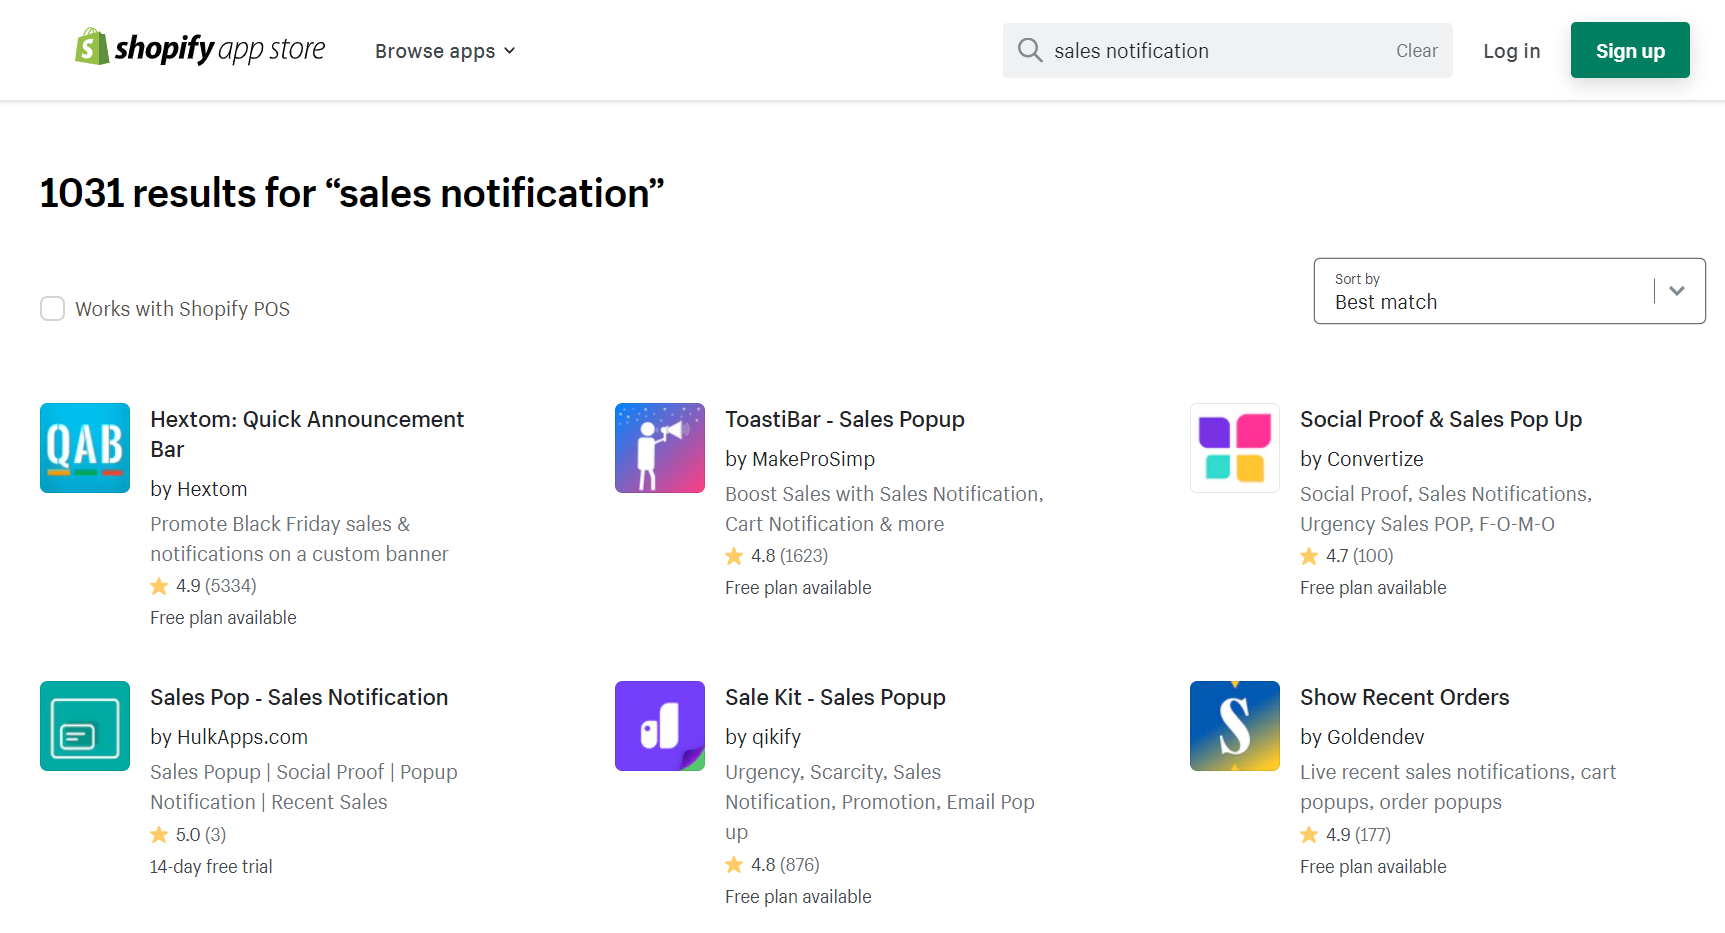 Sales-notification-shopify-apps